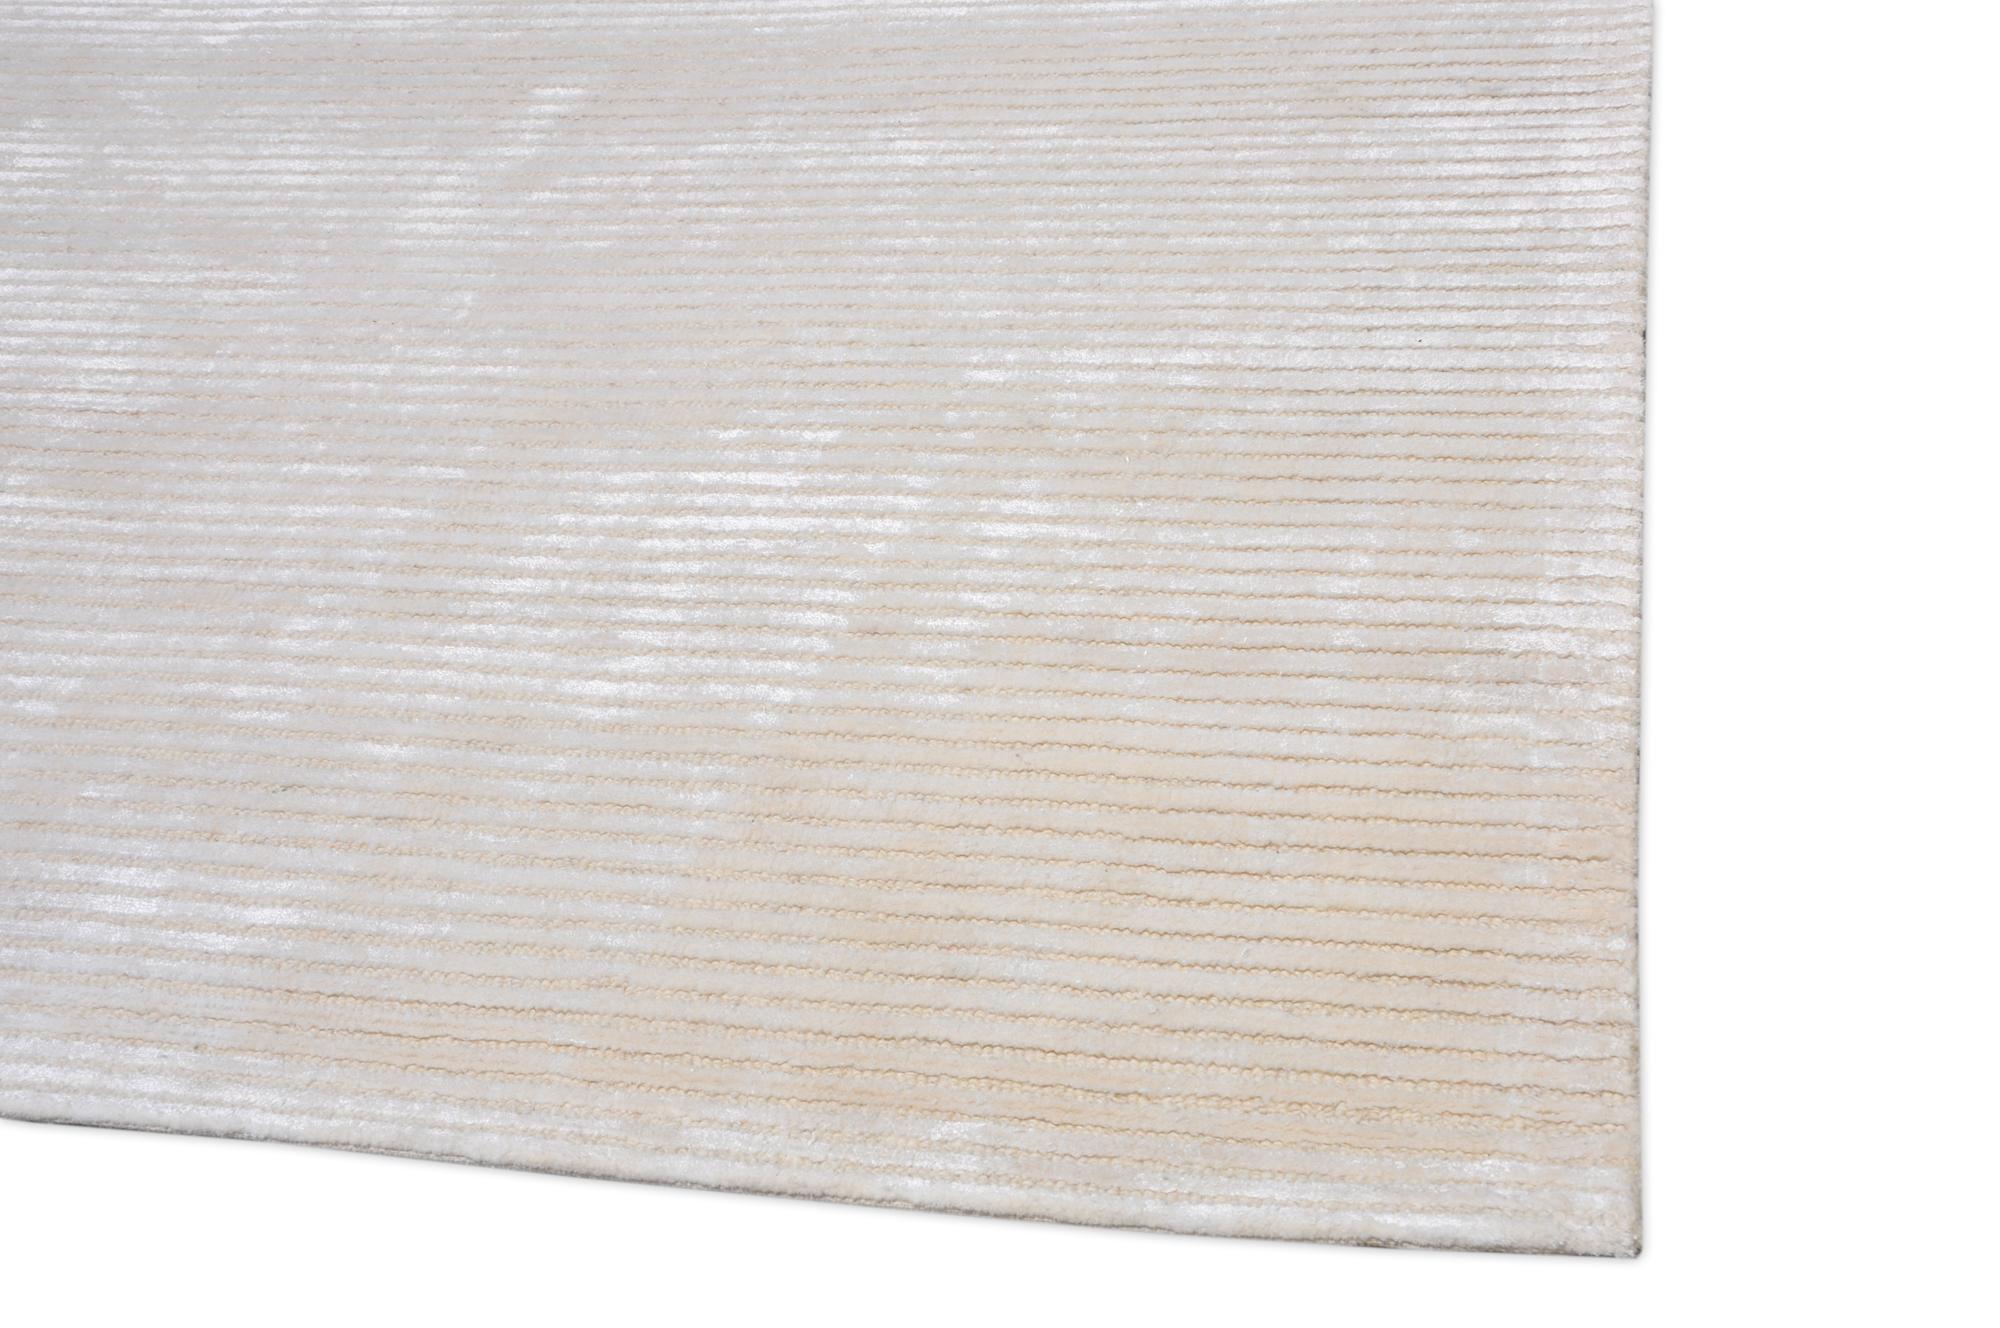 Pasargad Home Edgy Collection Hand-Tufted Bamboo Silk & Wool Area Rug, 5' 0" X 8' 0", Beige - image 5 of 6